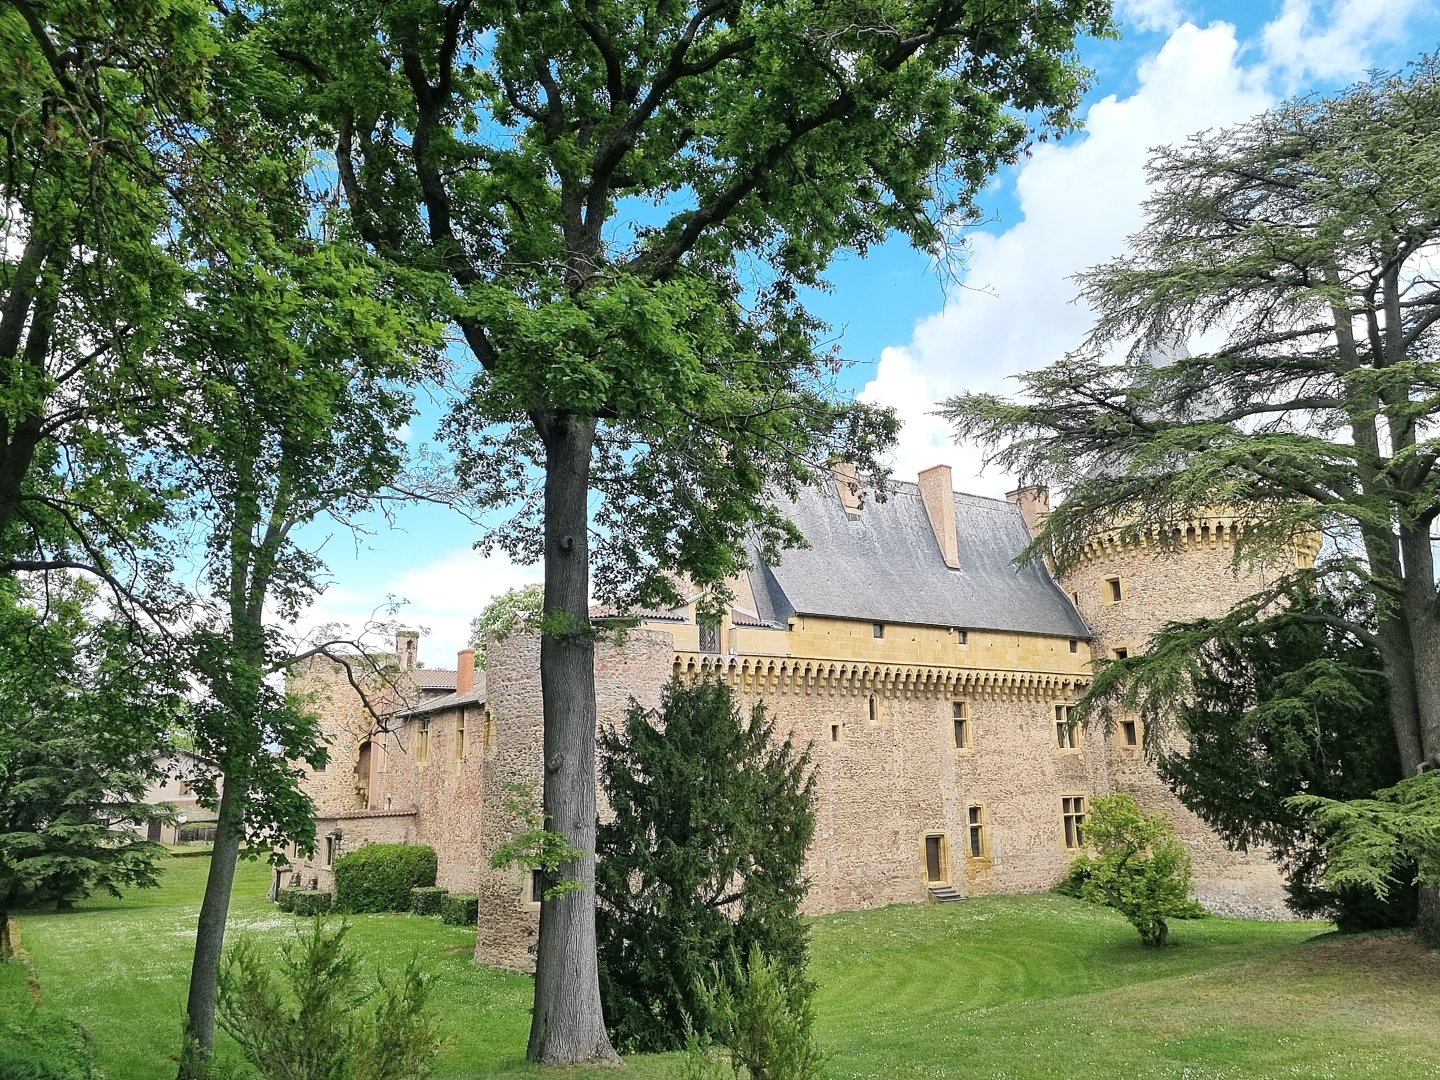 Side view of the Chateau